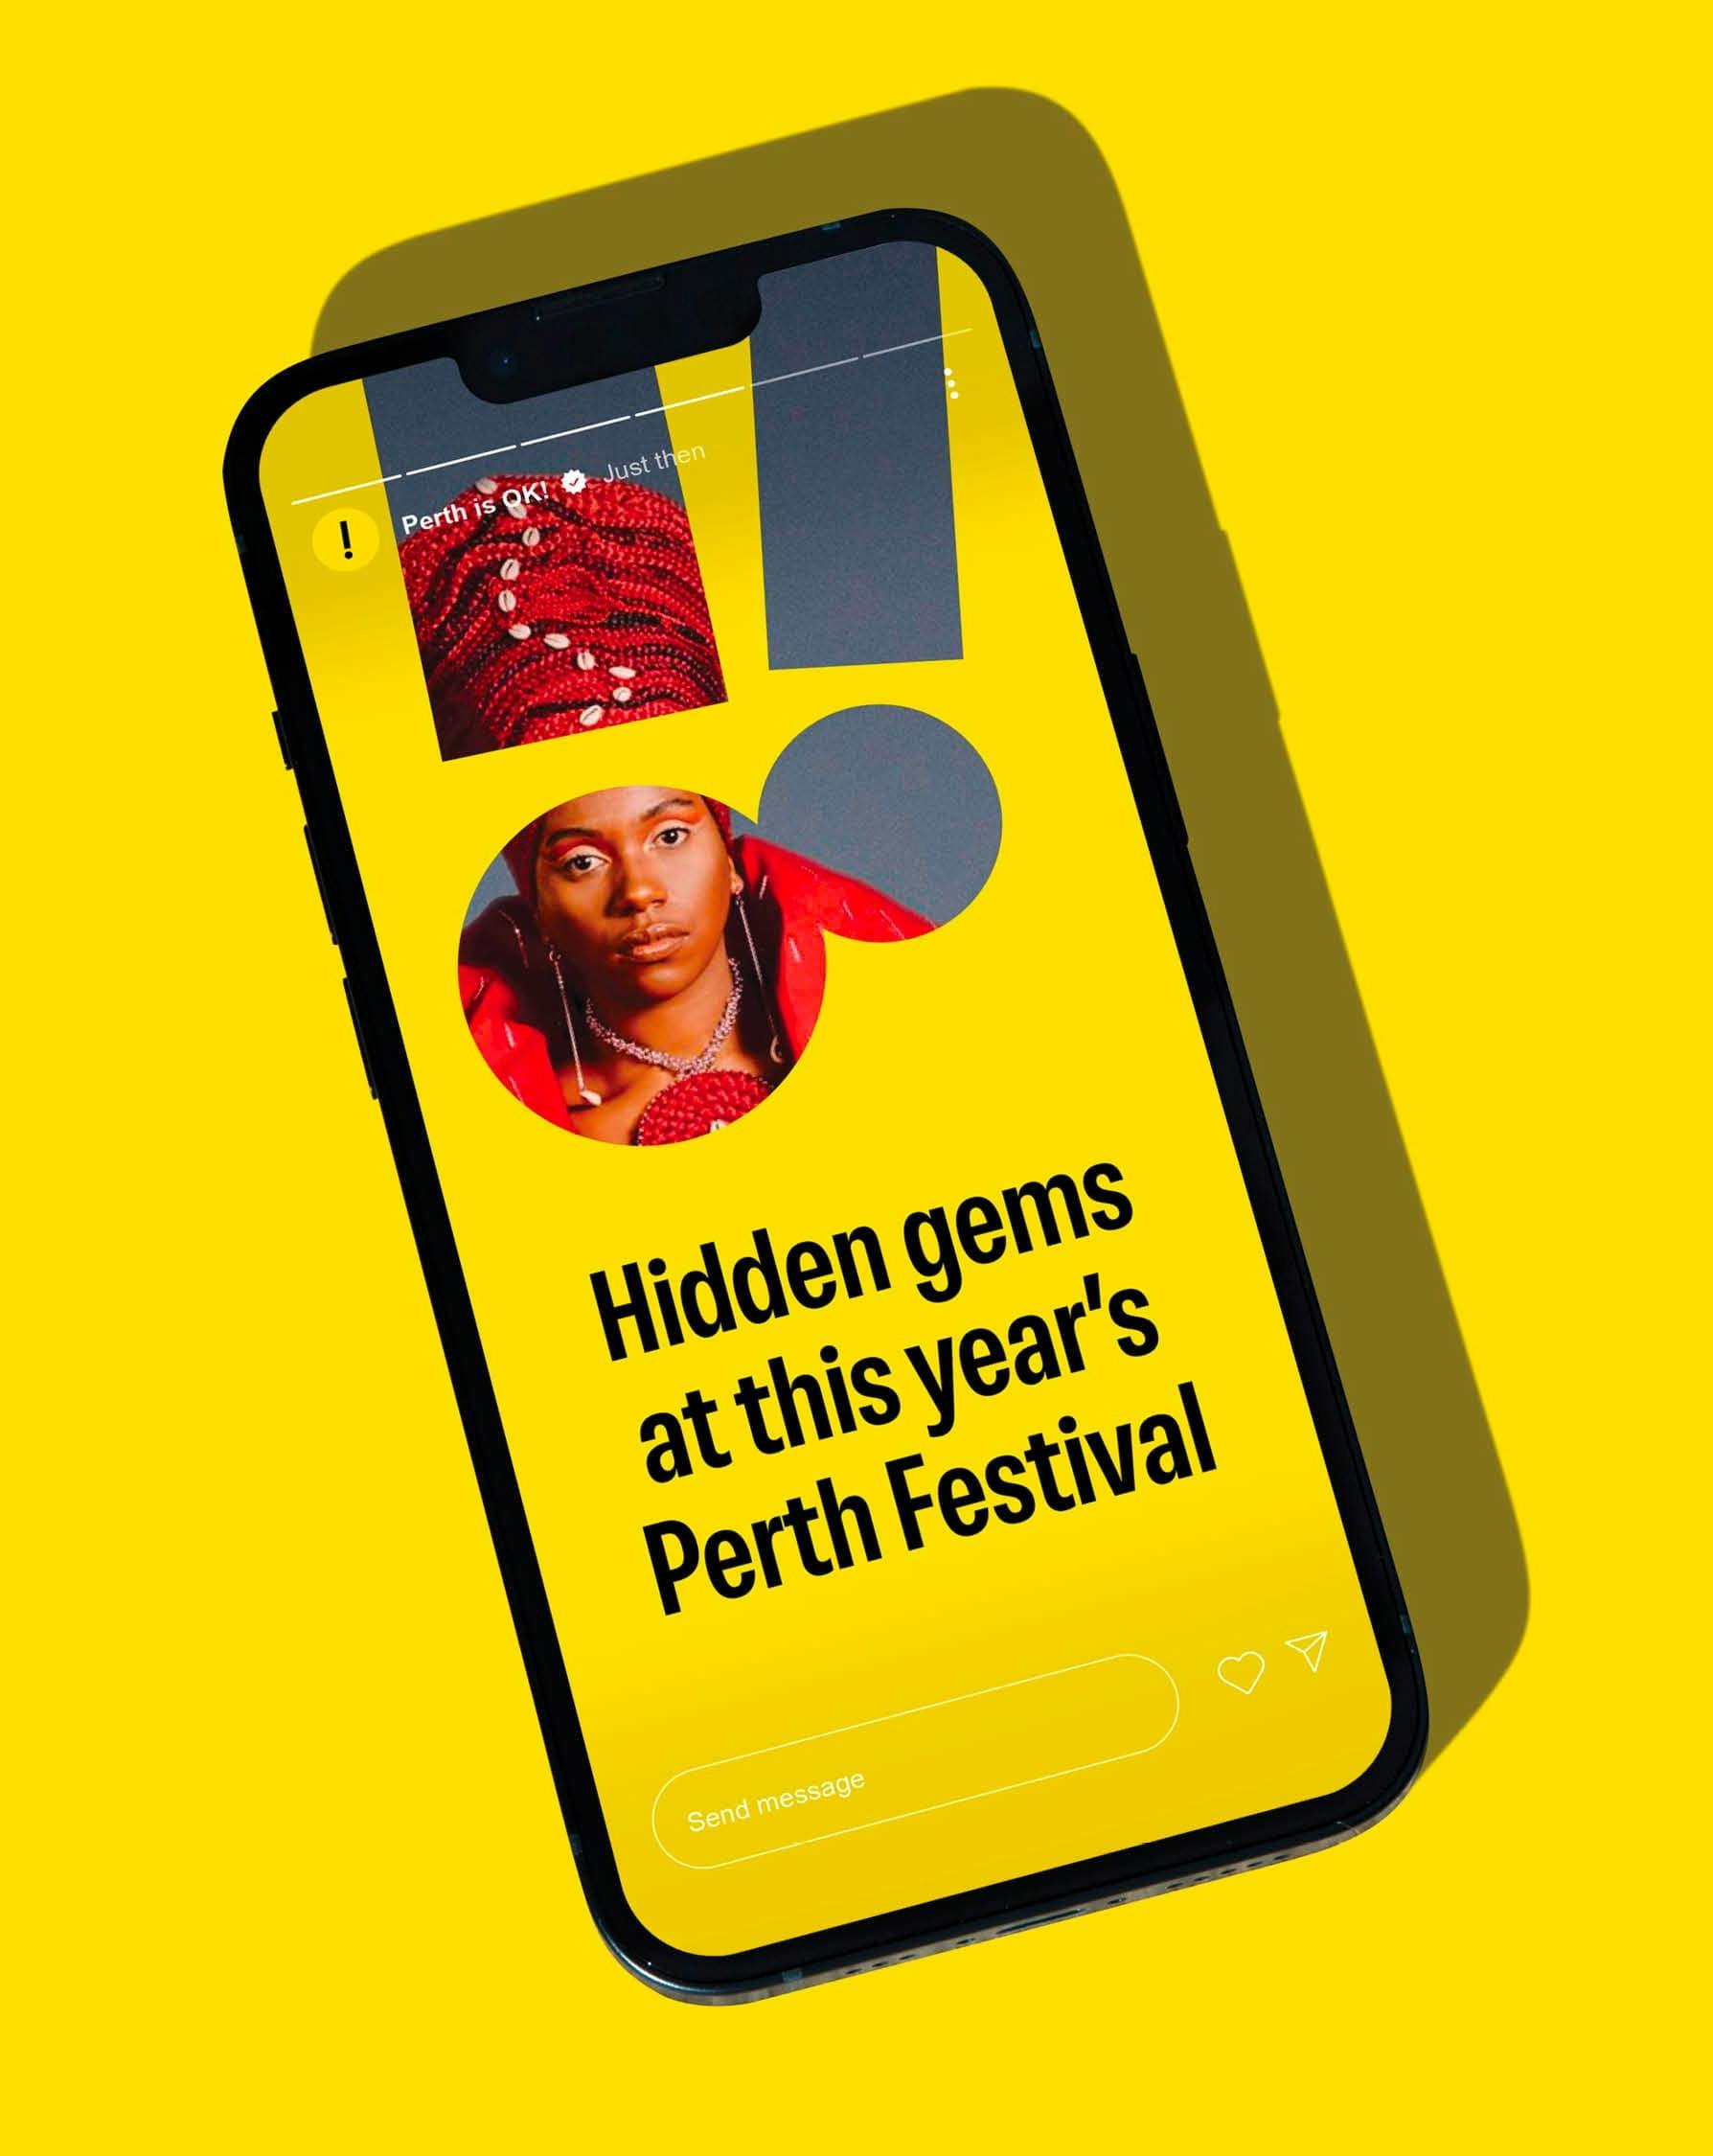 Perth is OK! is the largest independent digital media outlet in Western Australia.